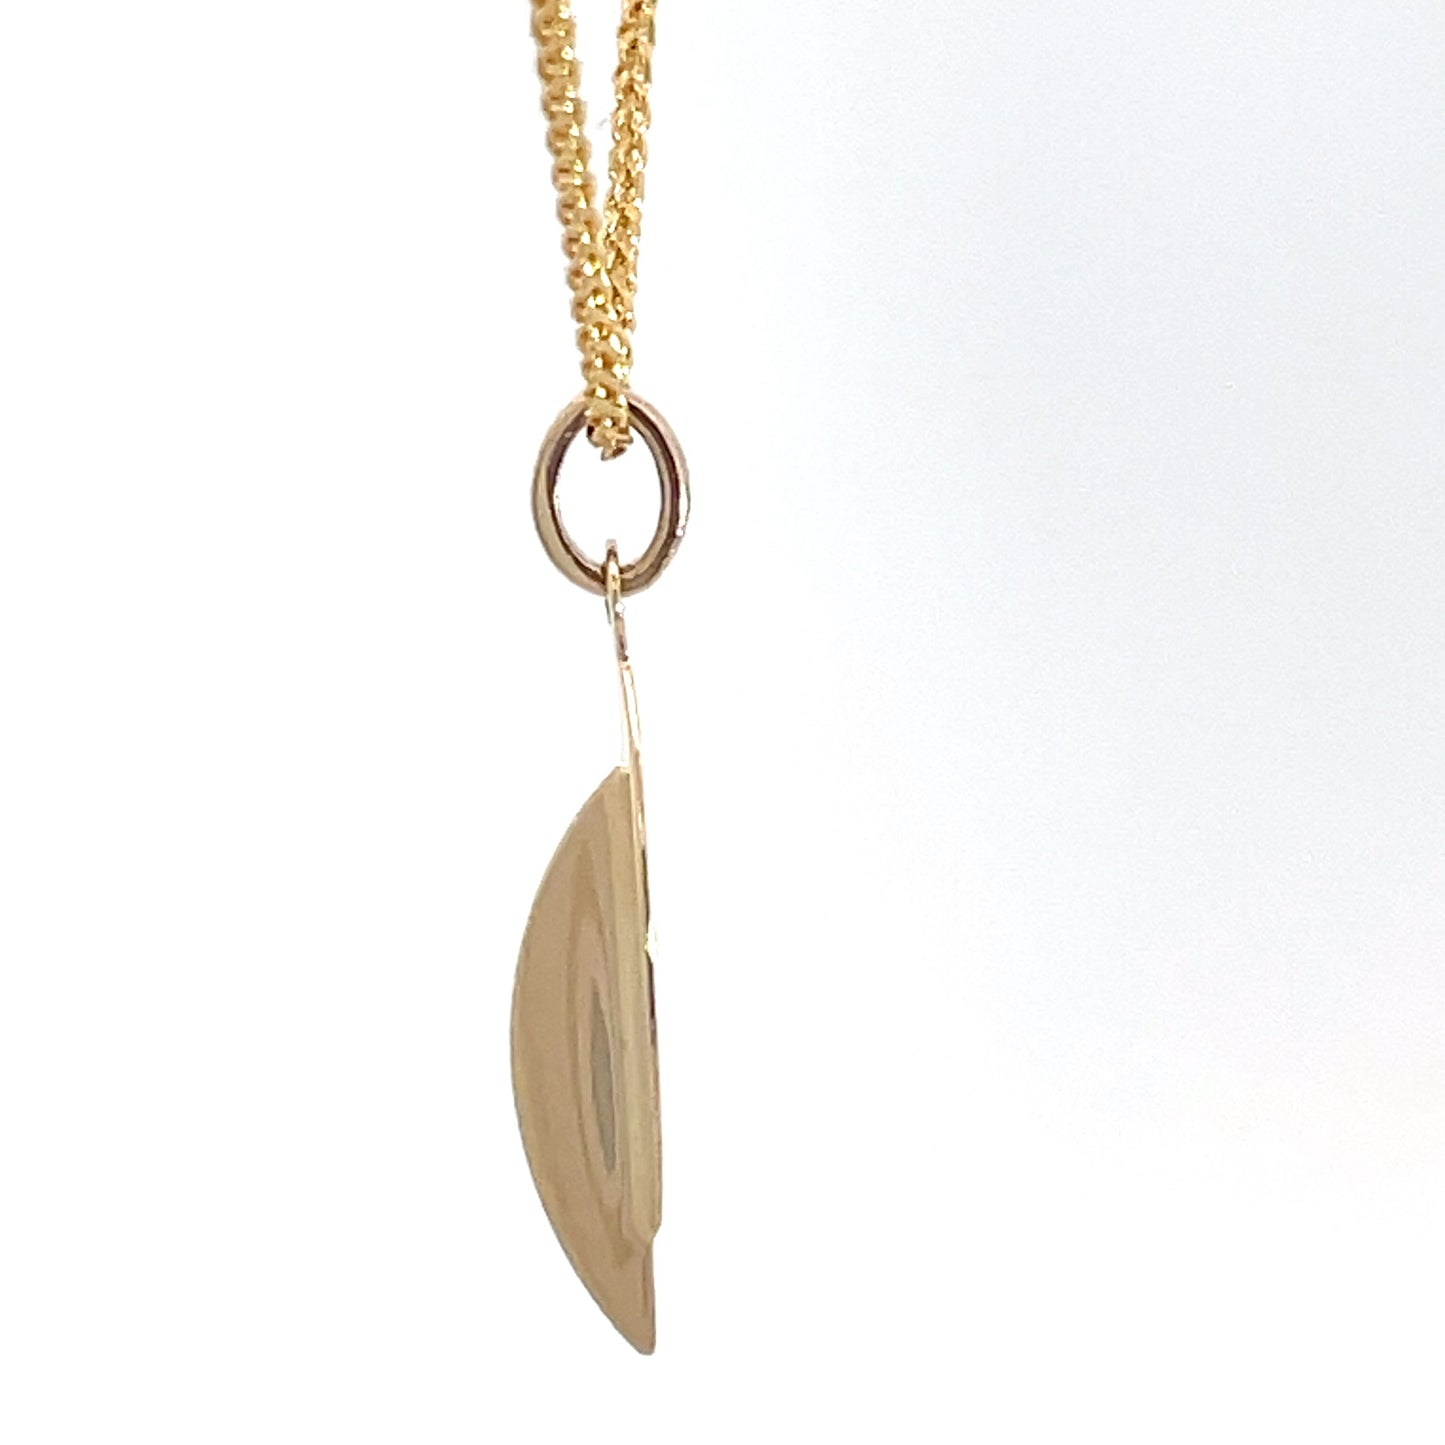 9ct Yellow Gold Drop Pendant and Chain